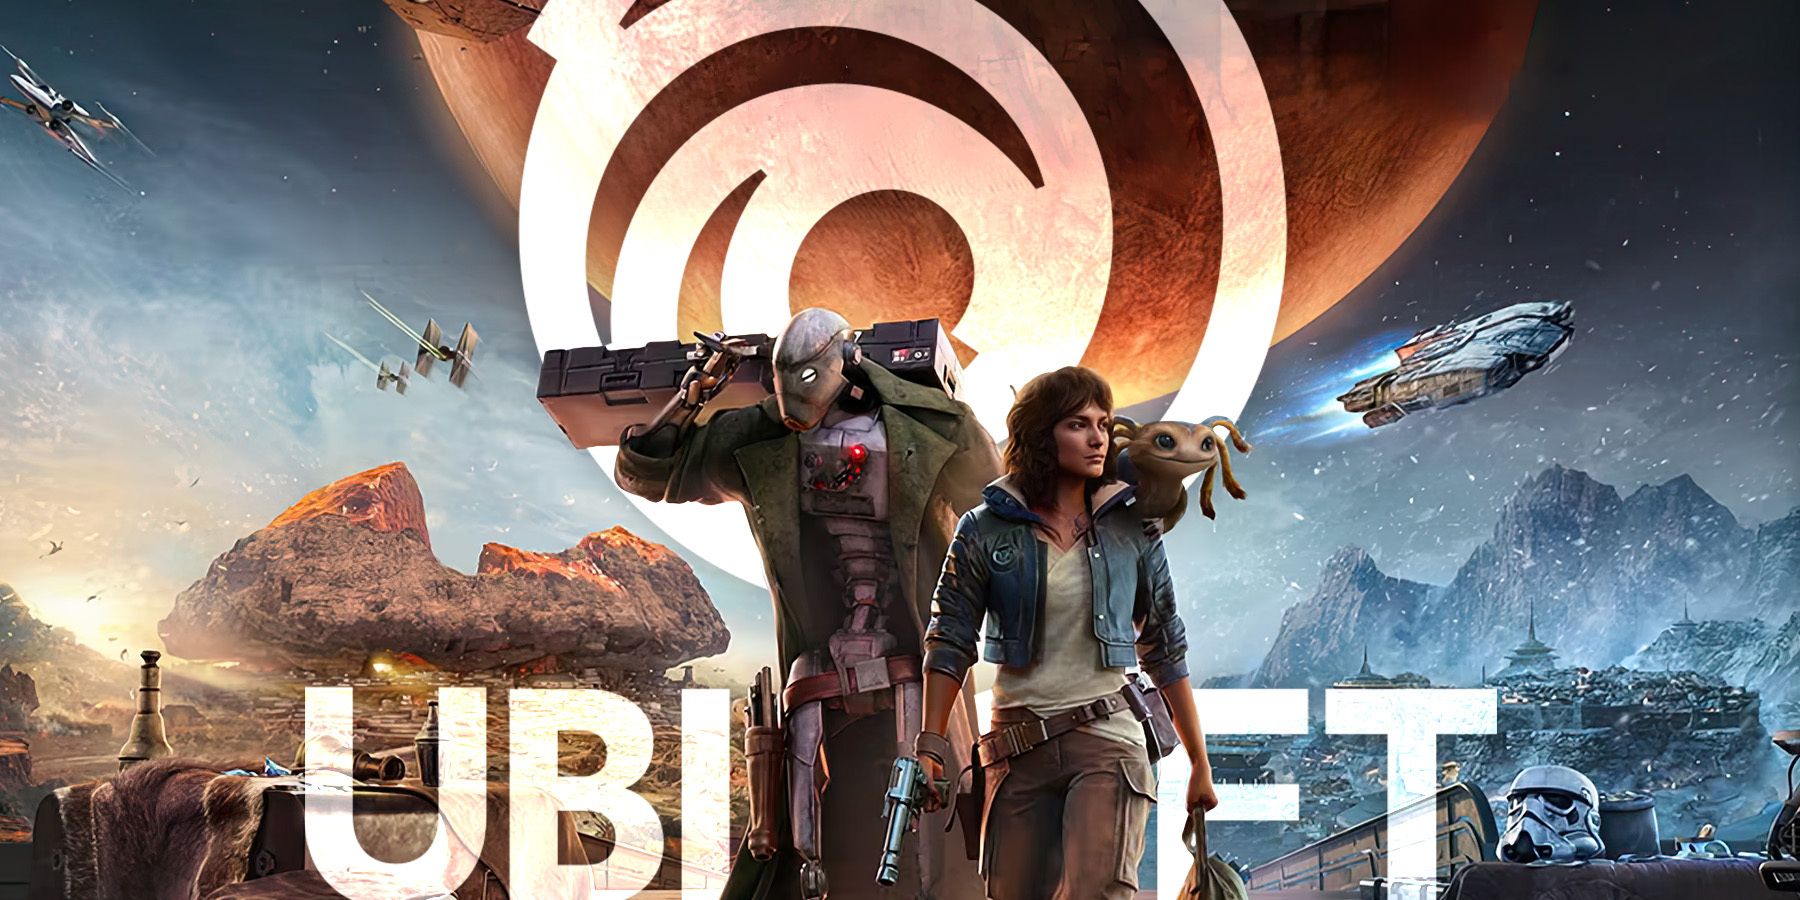 Star Wars: Outlaws is a new open-world Star Wars game from Ubisoft